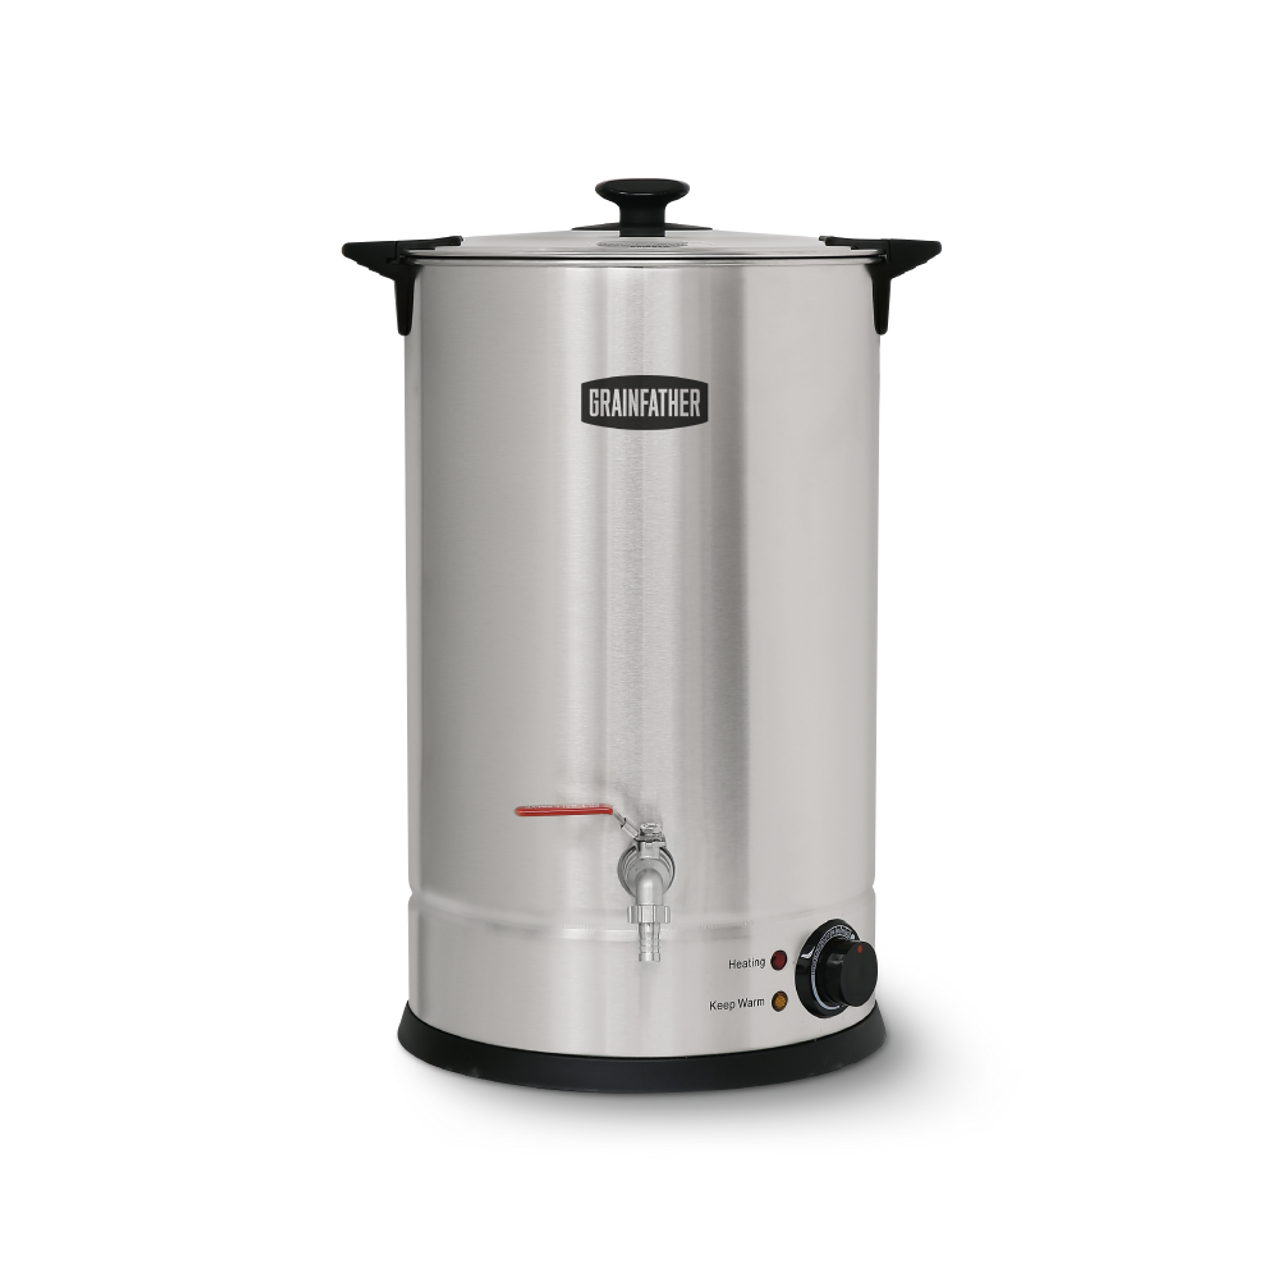 https://cdn11.bigcommerce.com/s-hb88tx65hv/images/stencil/1280x1280/products/1512/1847/0005713_grainfather-25l-sparge-water-heater__00006.1677952058.png?c=1